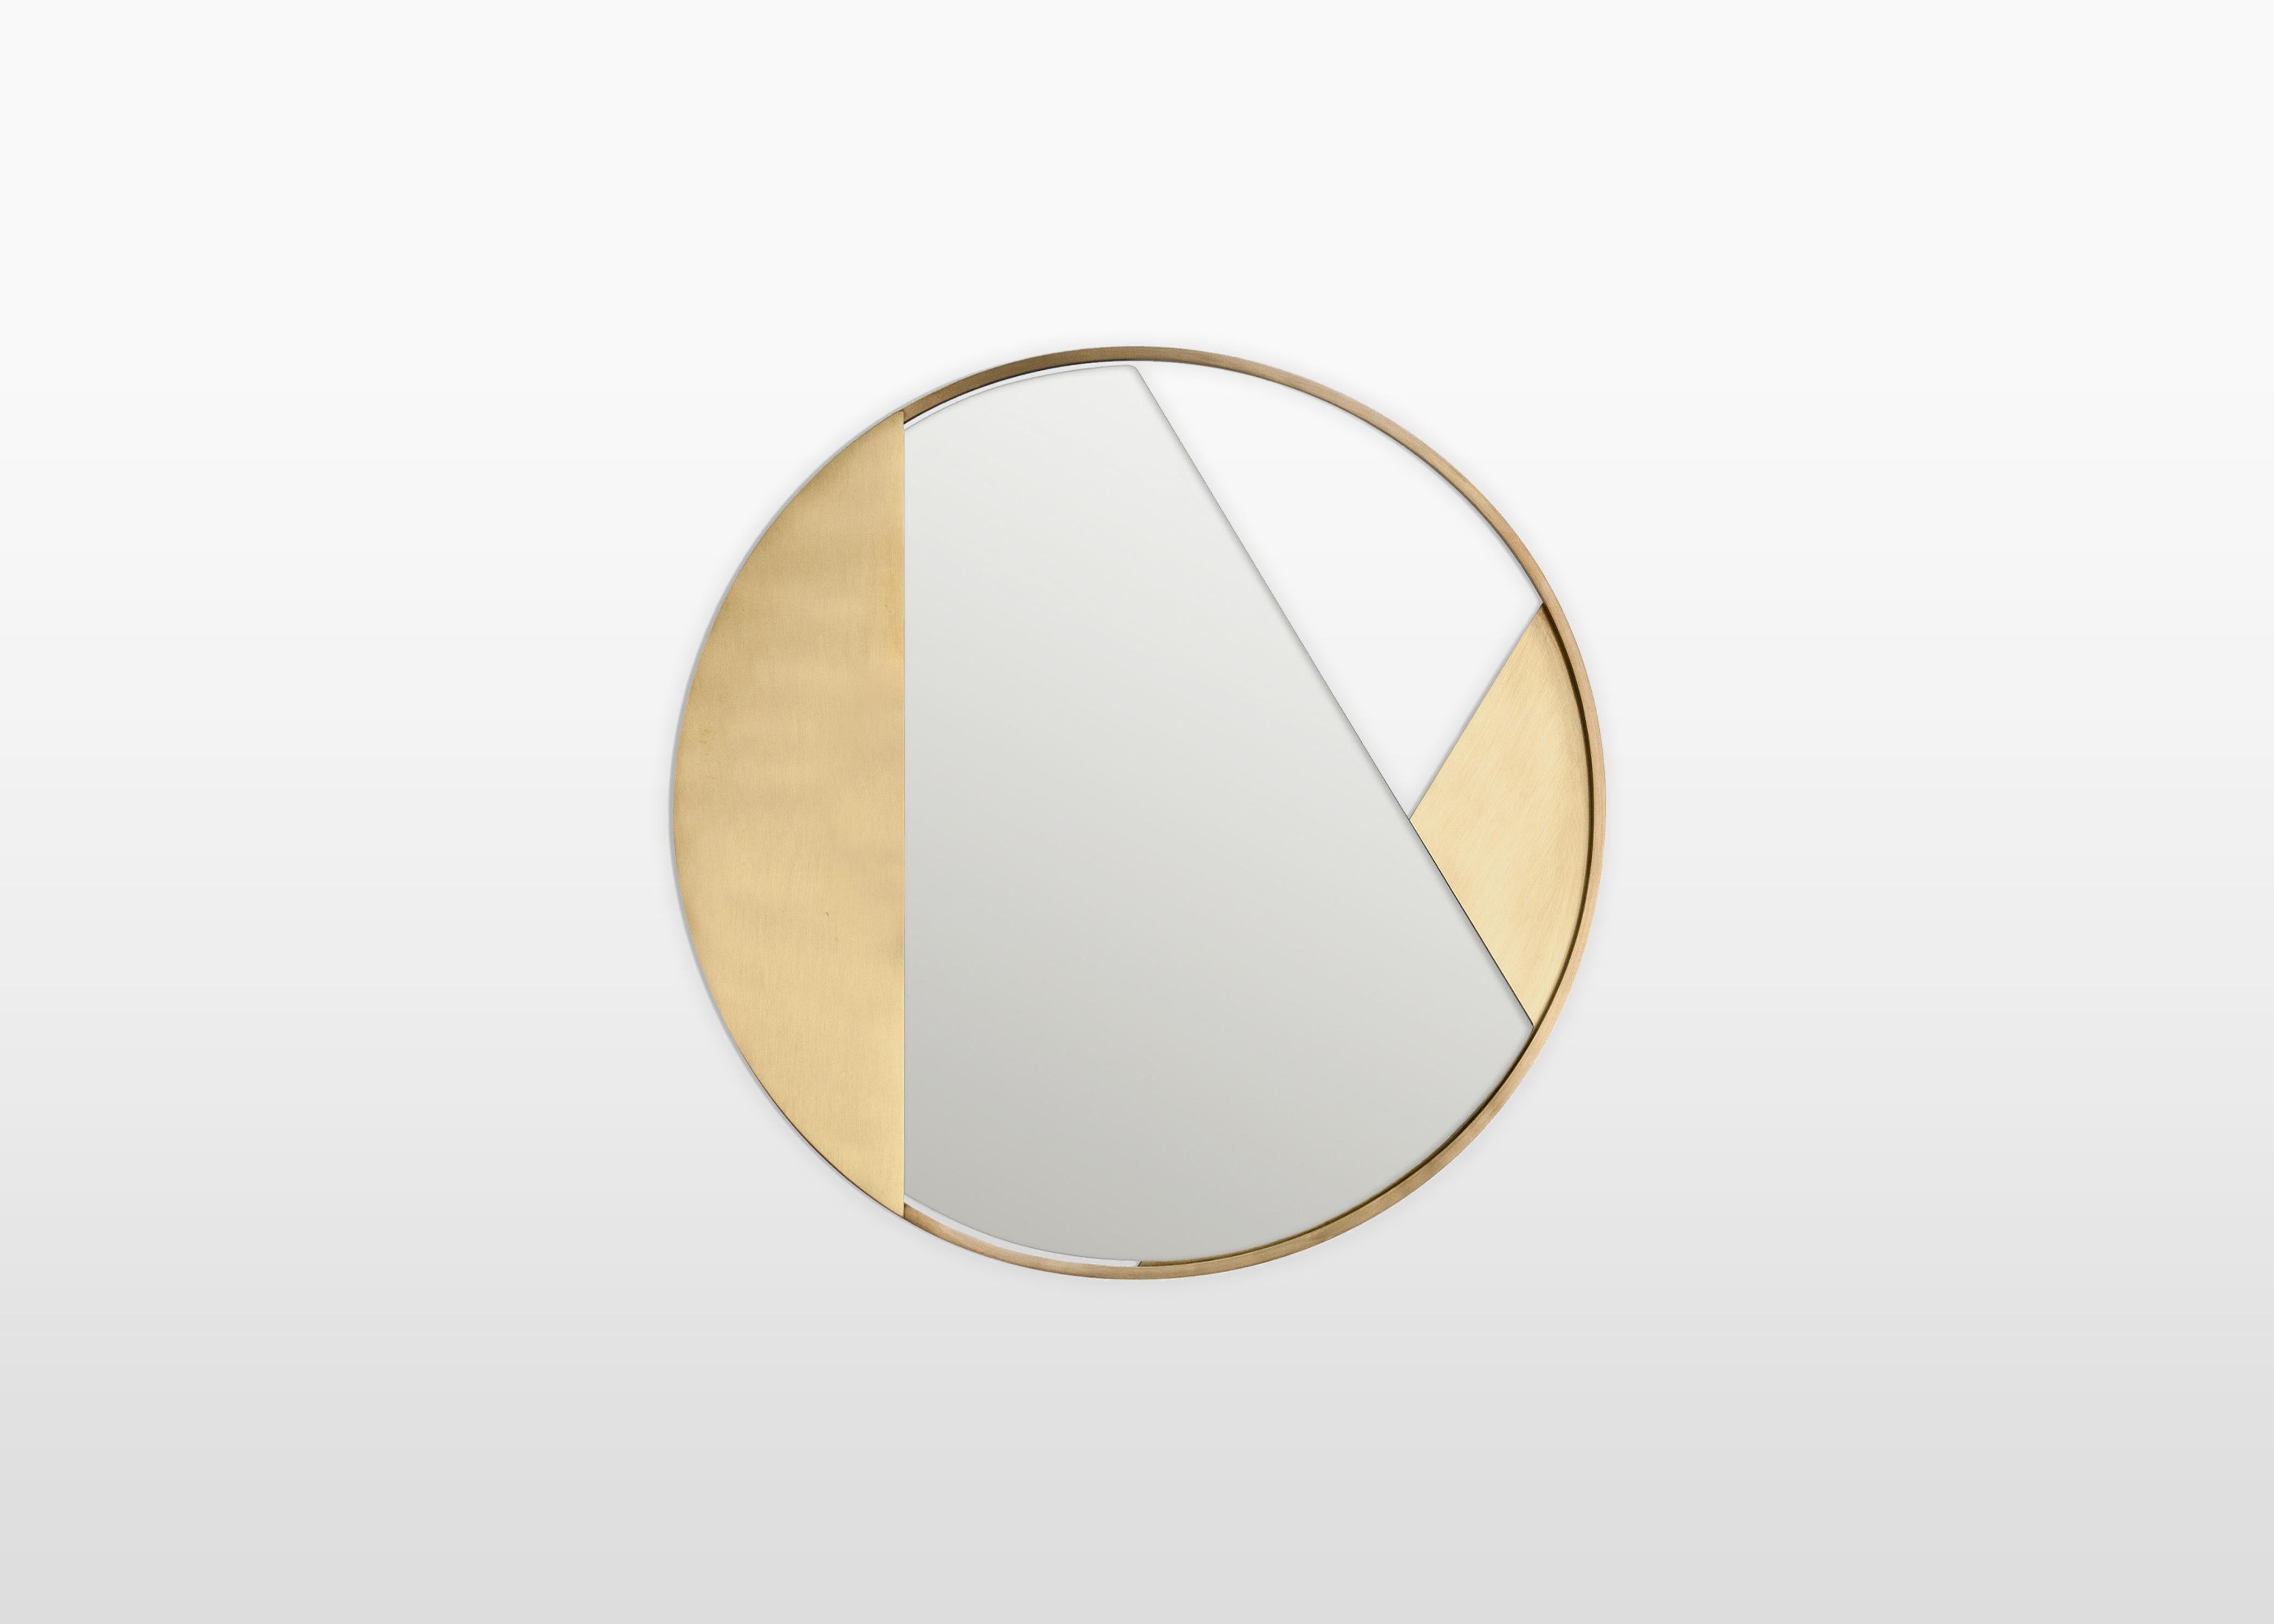 Edition mirror by Edizione Limitata
Limited edition of 1000 pieces. Signed and numbered.
Designers: Simone Fanciullacci
Dimensions: D 4 x Ø 55 cm.
Materials: Brushed brass, mirror

Edizione Limitata, that is to say “Limited Edition”, is a brand